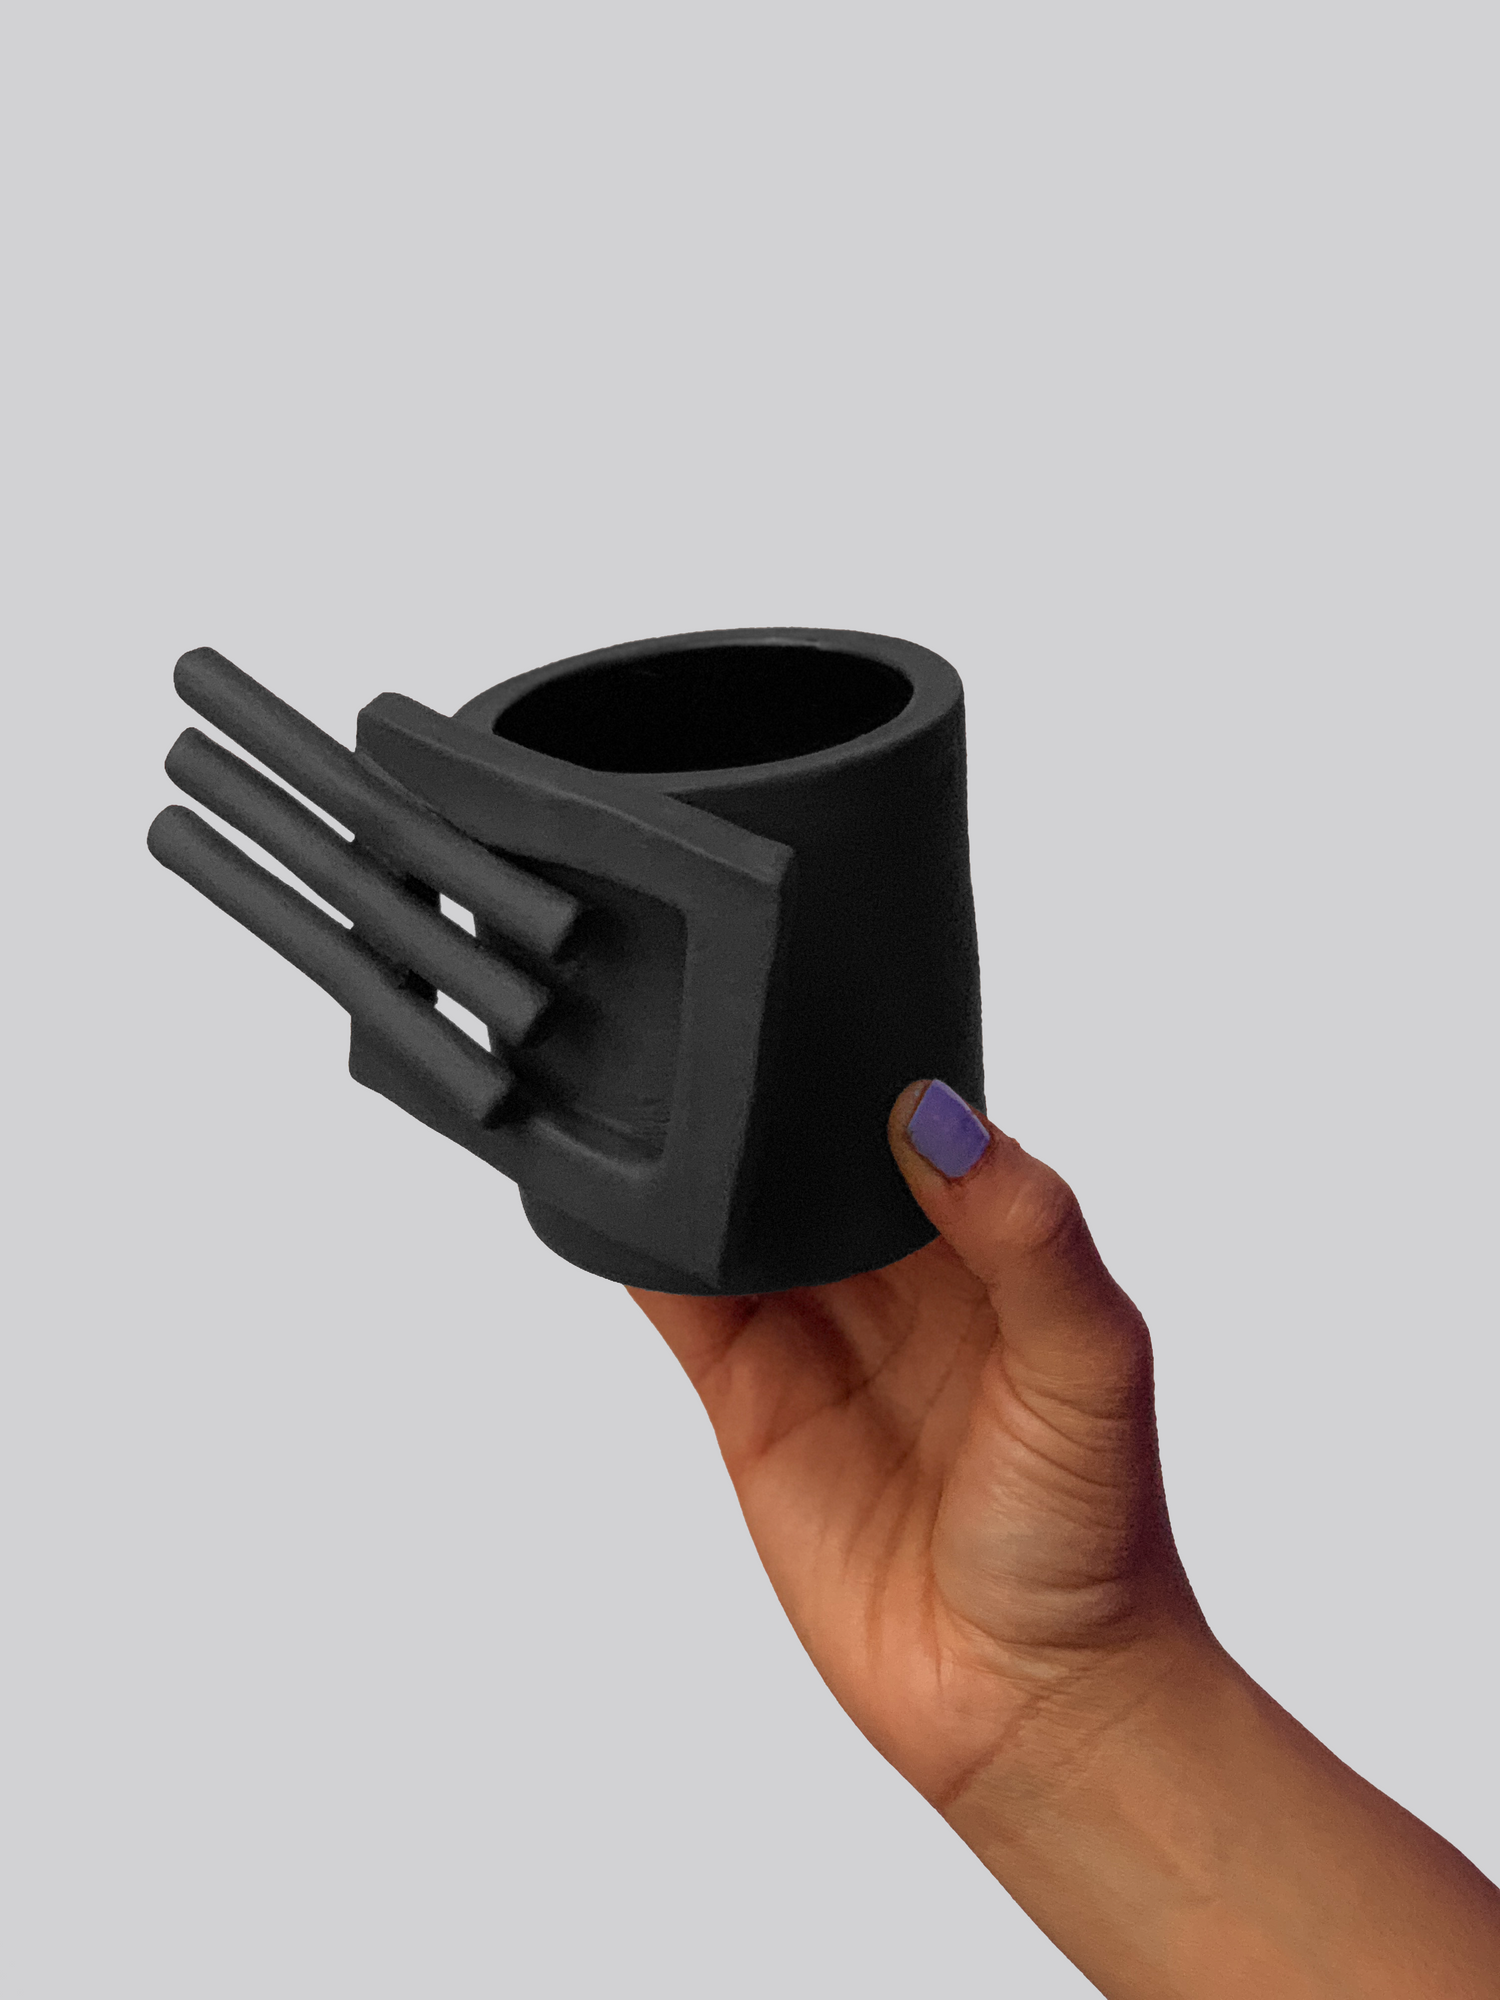 Black matte stoneware ceramic mug with an extended square on the side of the mug and three bars projecting outwards as the handle. 